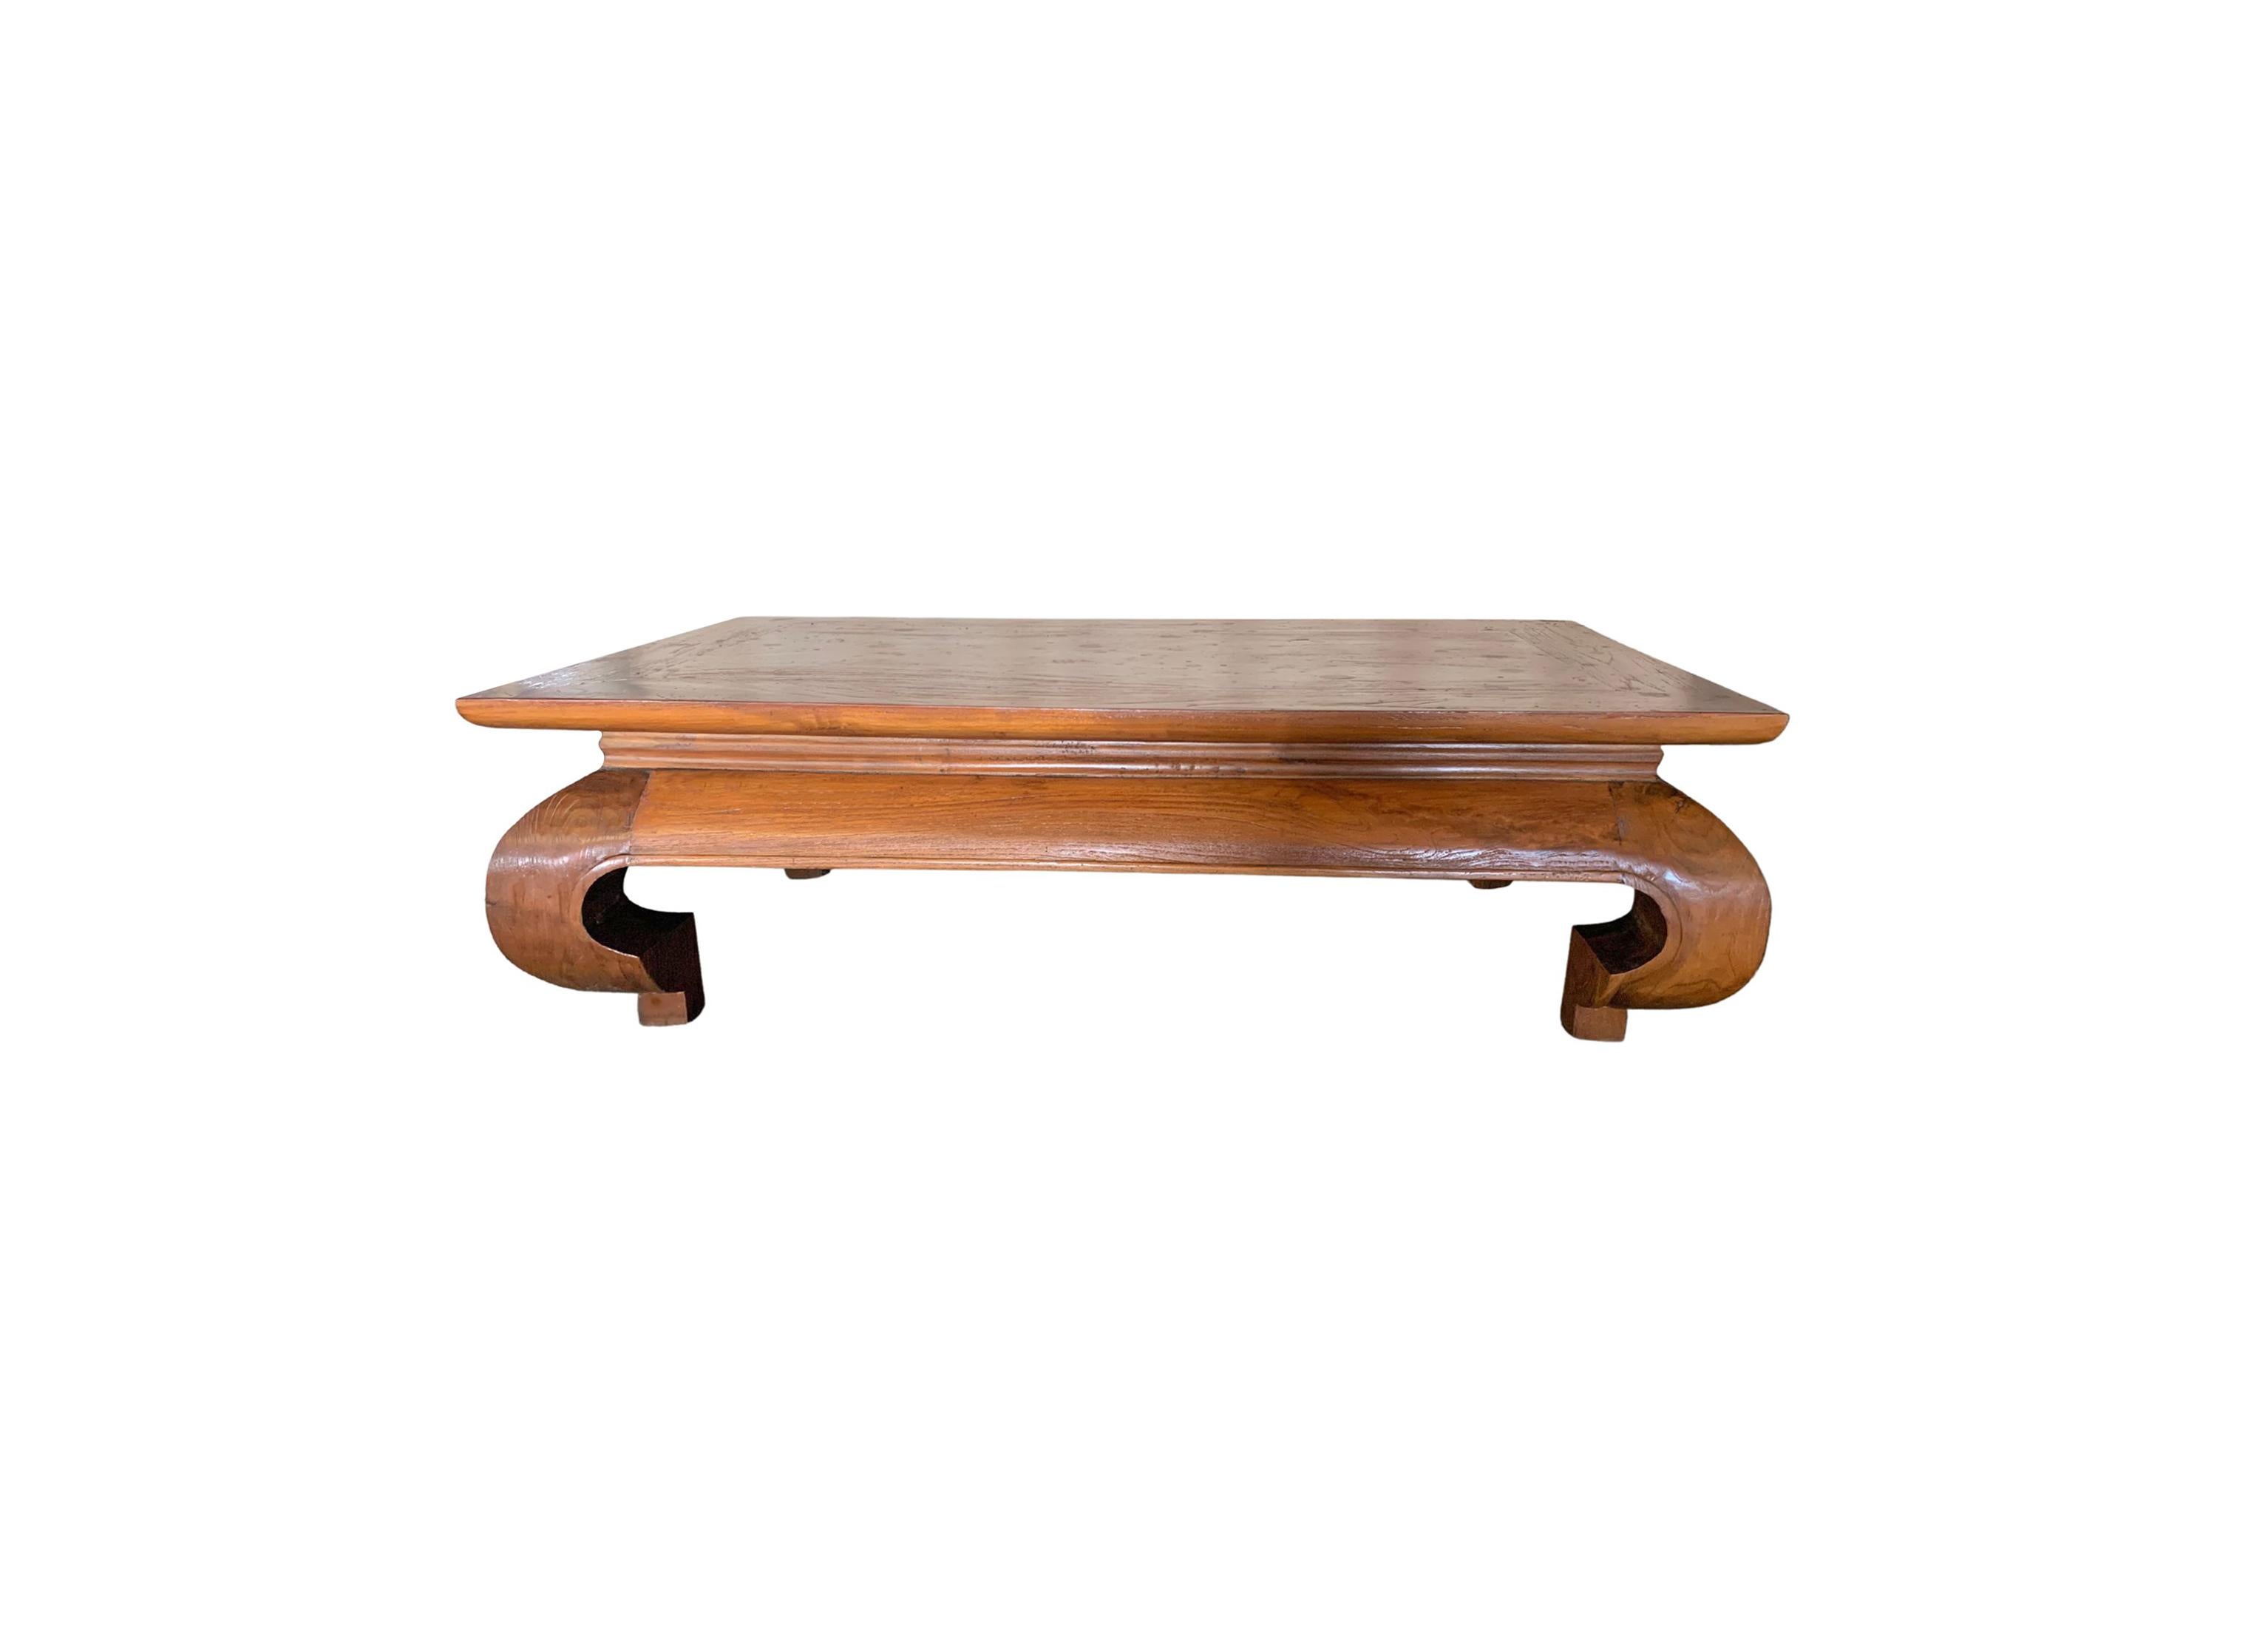 A wonderfully crafted teak wood low table with elegantly curved legs that blend with the table's contours. The mix of curved and straight lines add to this table's charm. A mix wood textures and shades are present on all sides.